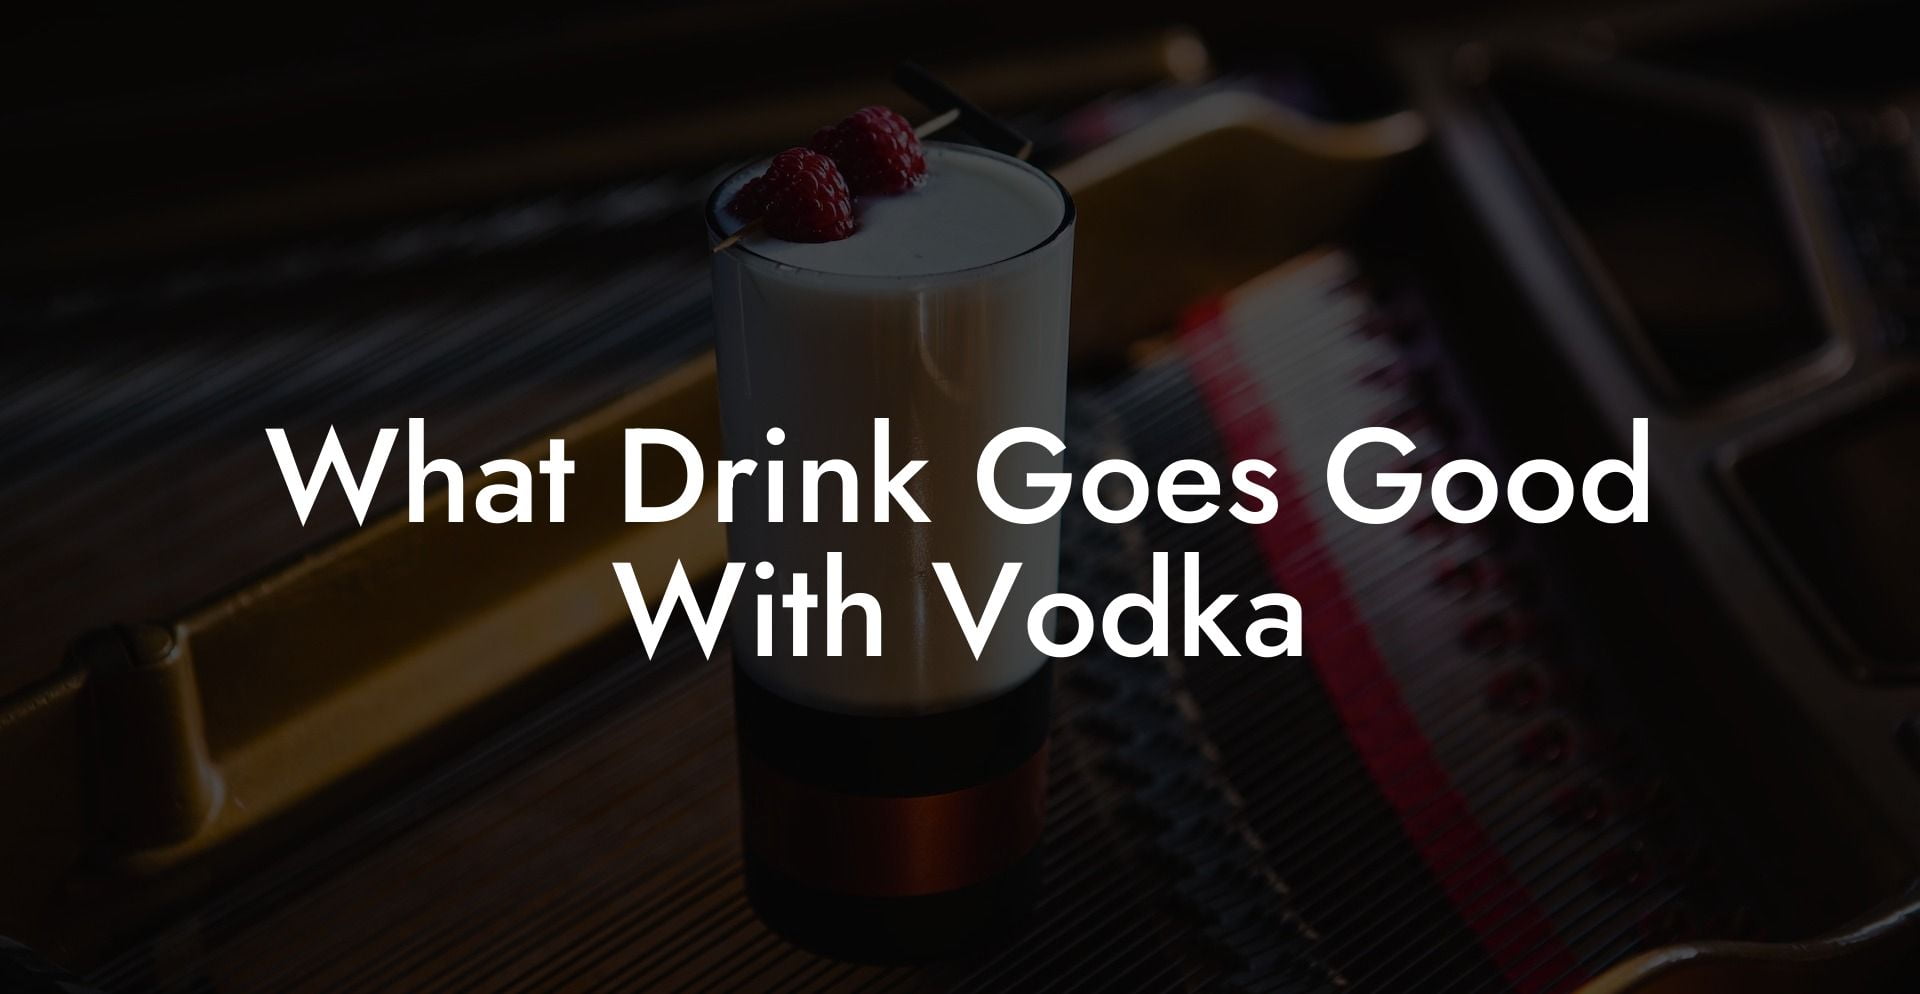 What Drink Goes Good With Vodka